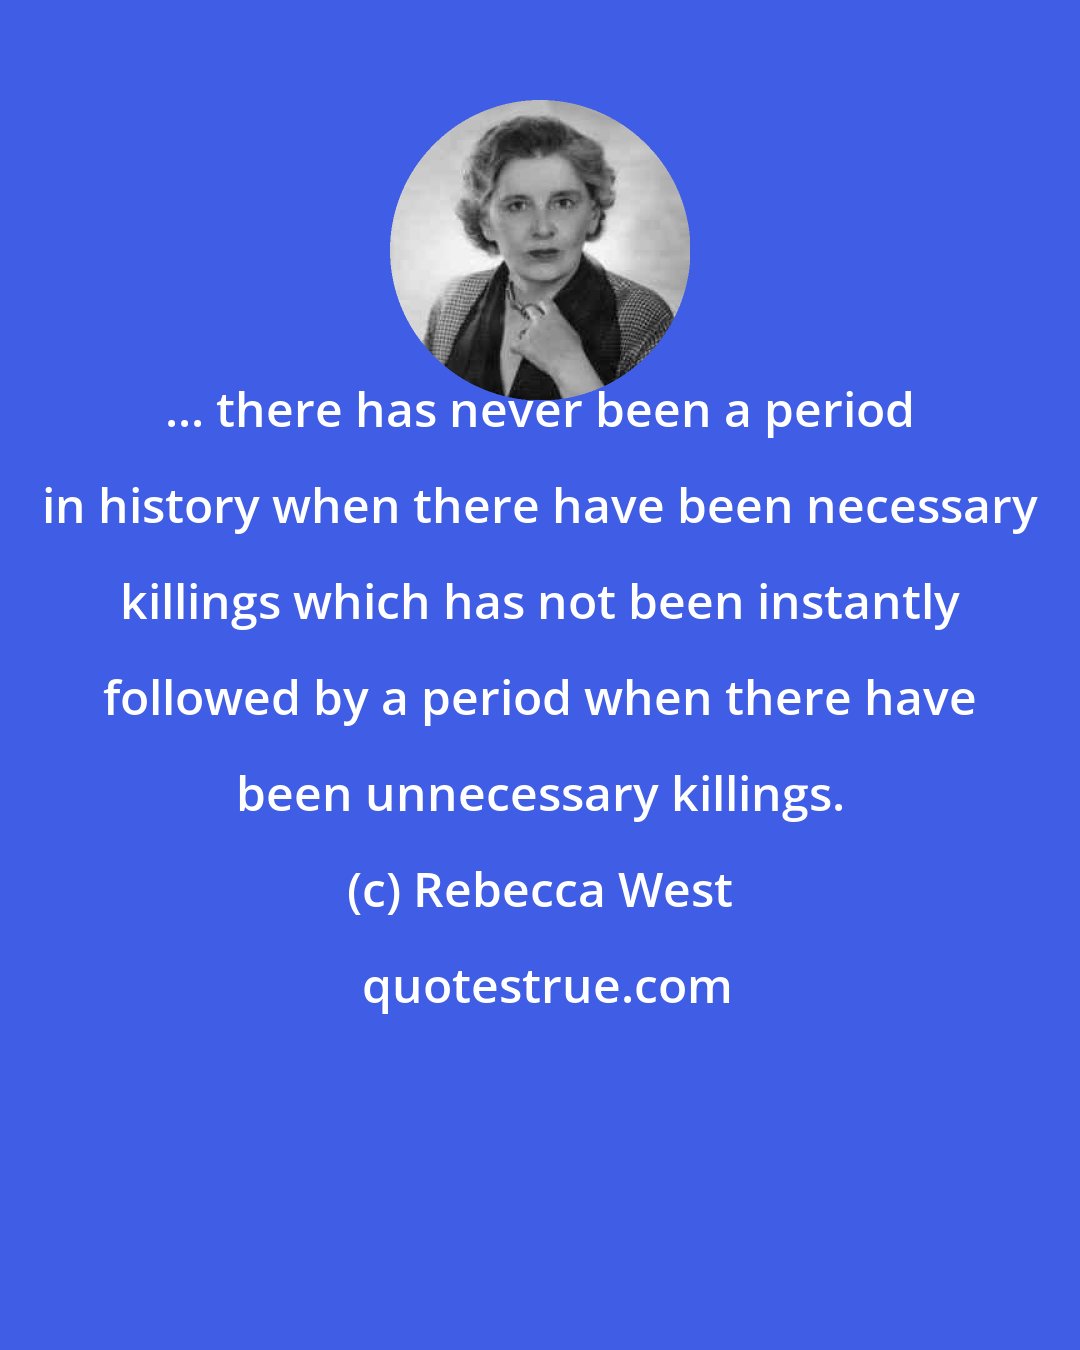 Rebecca West: ... there has never been a period in history when there have been necessary killings which has not been instantly followed by a period when there have been unnecessary killings.